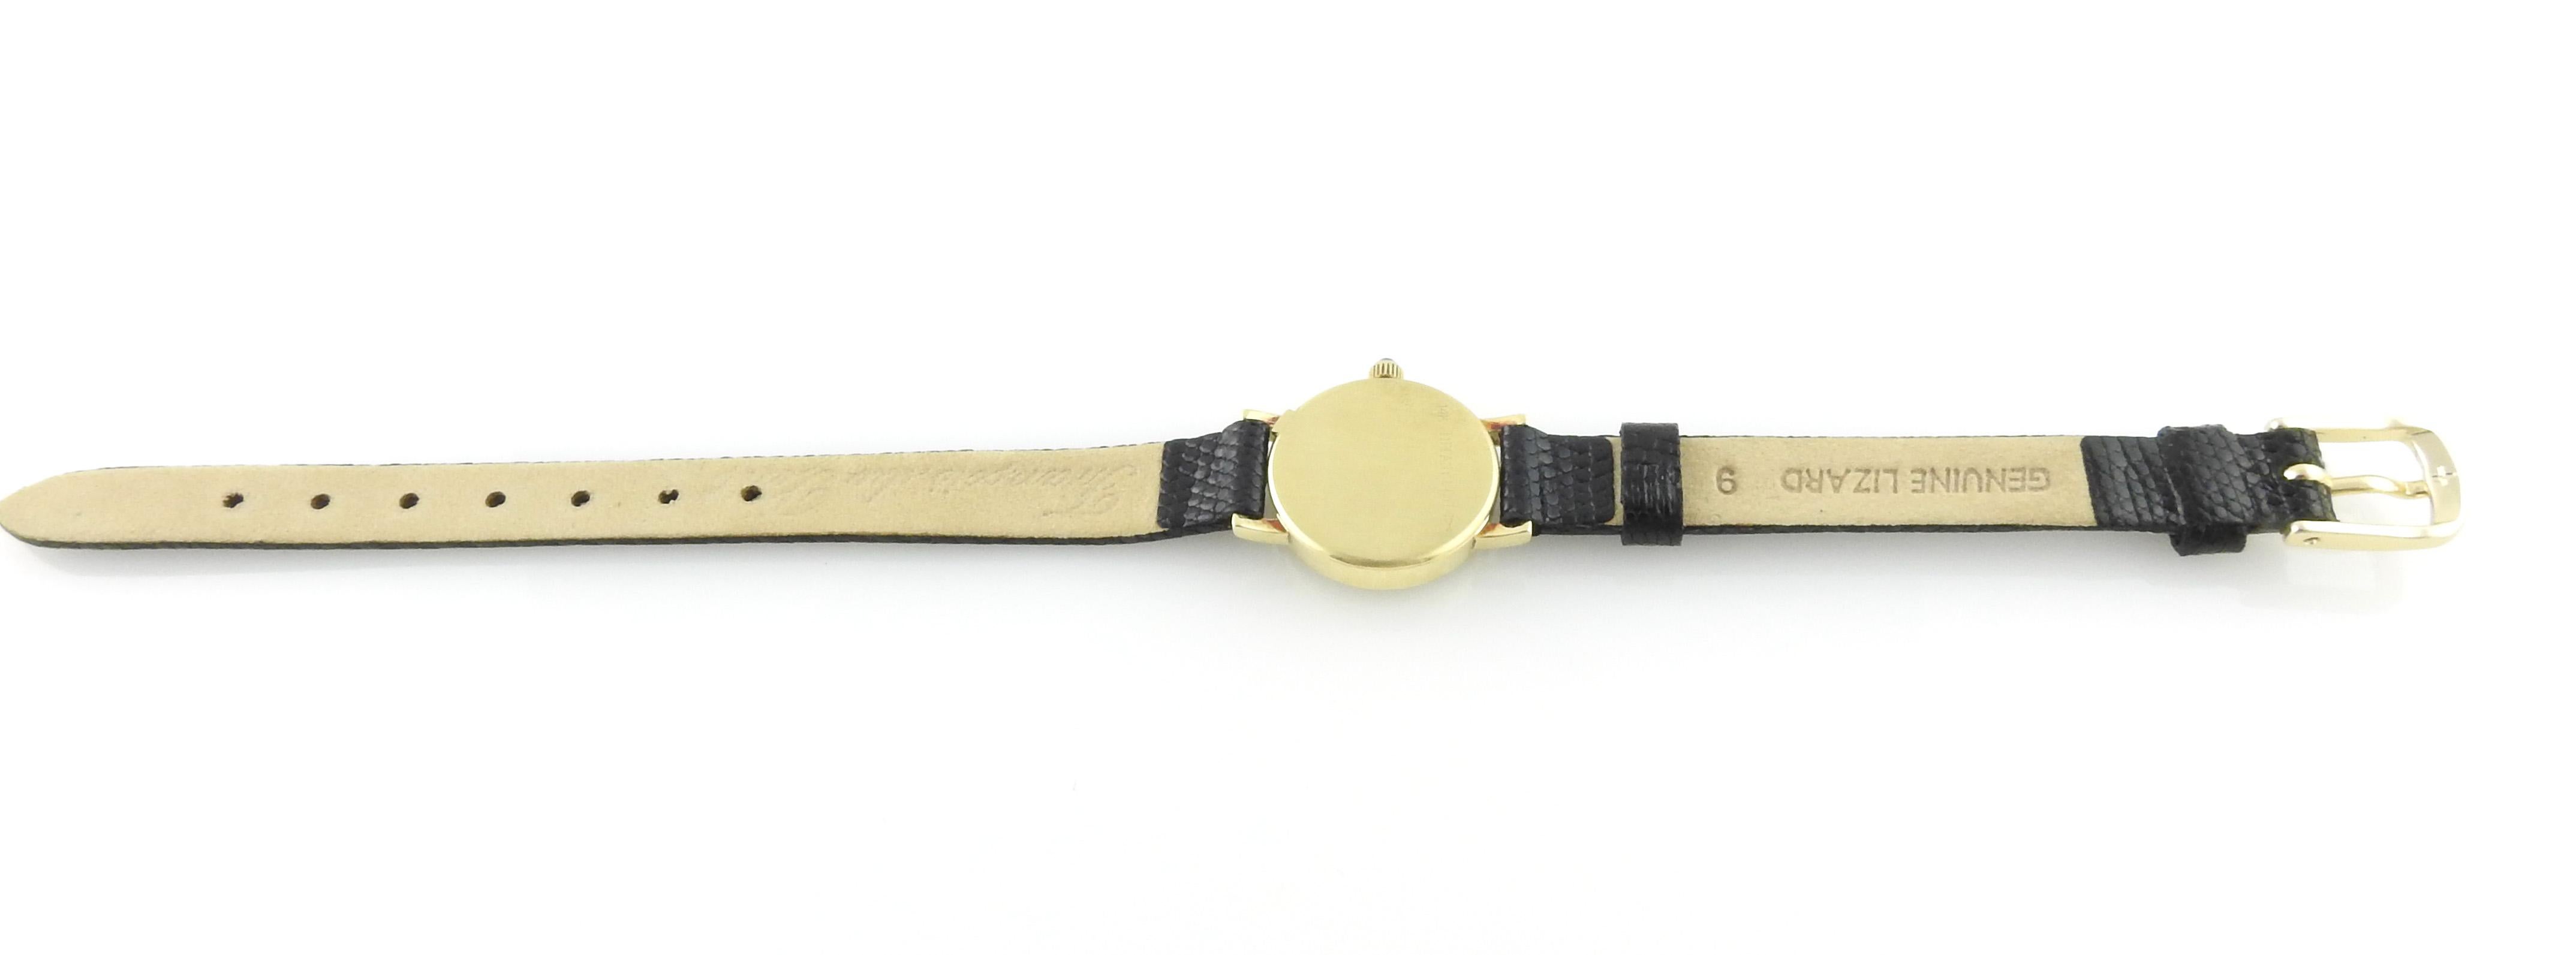 Vintage Tiffany & Co. 14K Yellow Gold Petite Ladies Watch Gold Dial Black Band 4